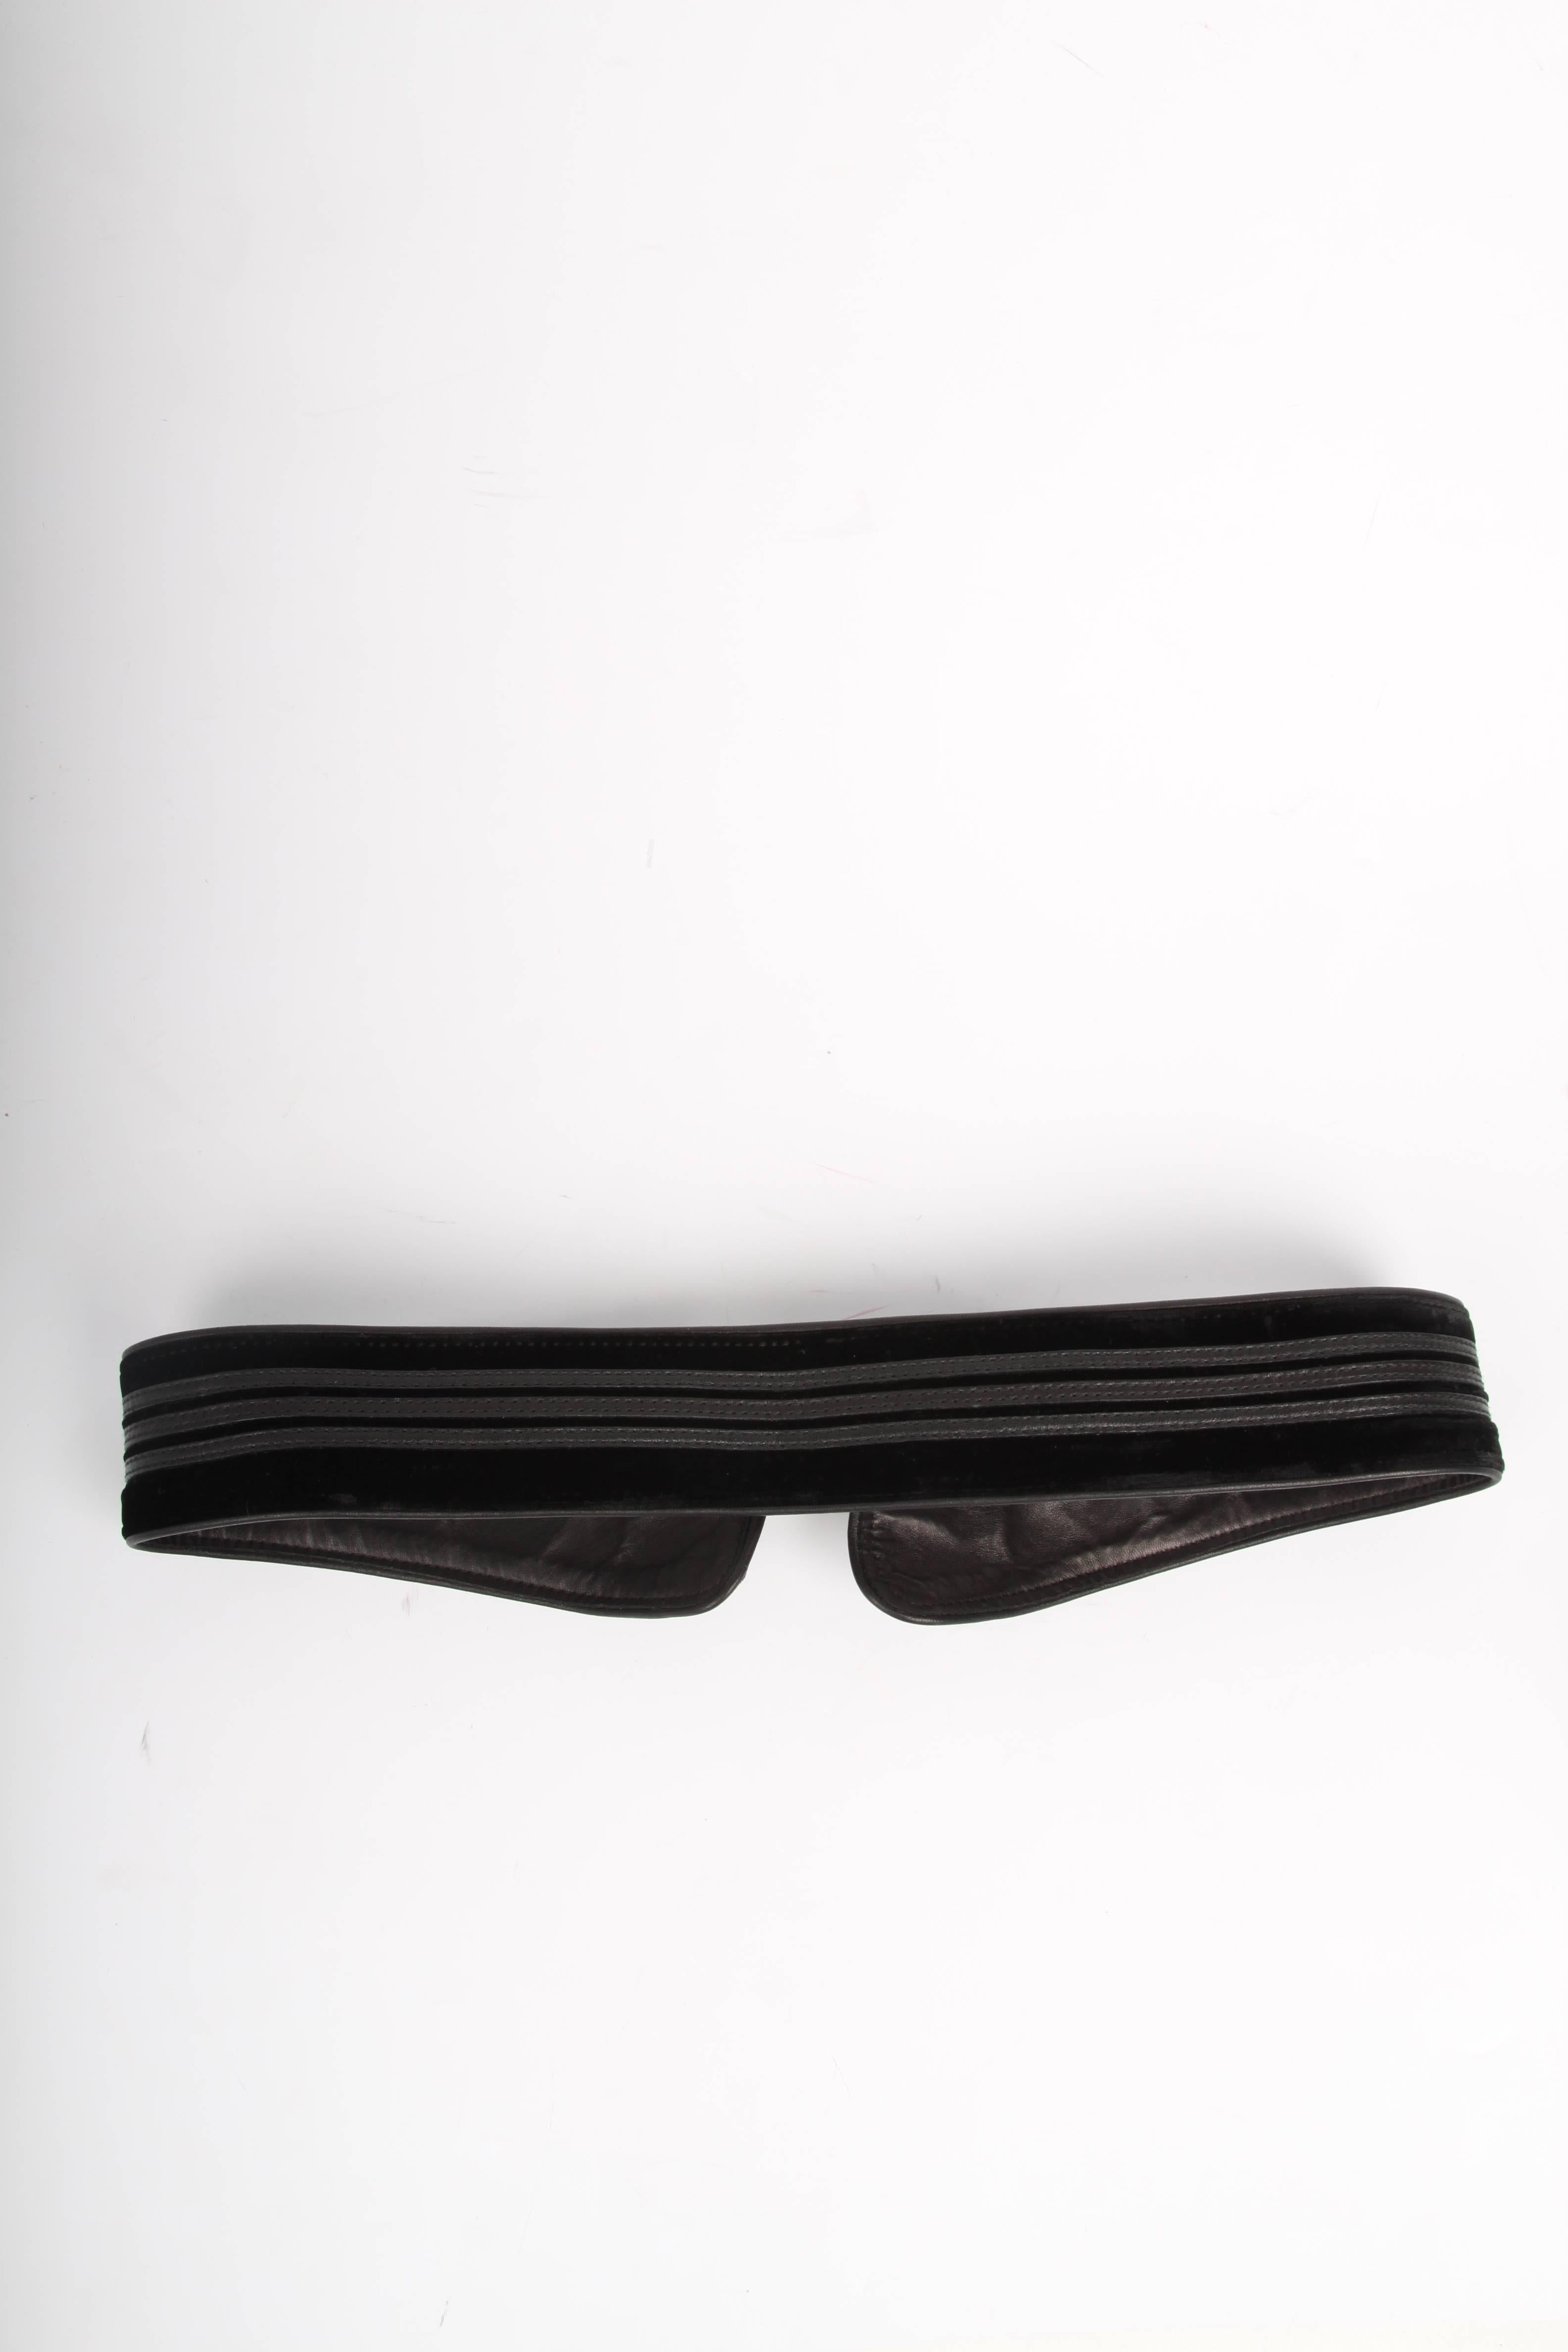 Vintage Gucci belt in black leather and velvet.

Front closure with a silver-tone buckle. The length of the belt is 90 centimeters, 9 centimeters wide at the front.

In good vintage condition, here and there a little spot in the velvet. 7,5/10

Made